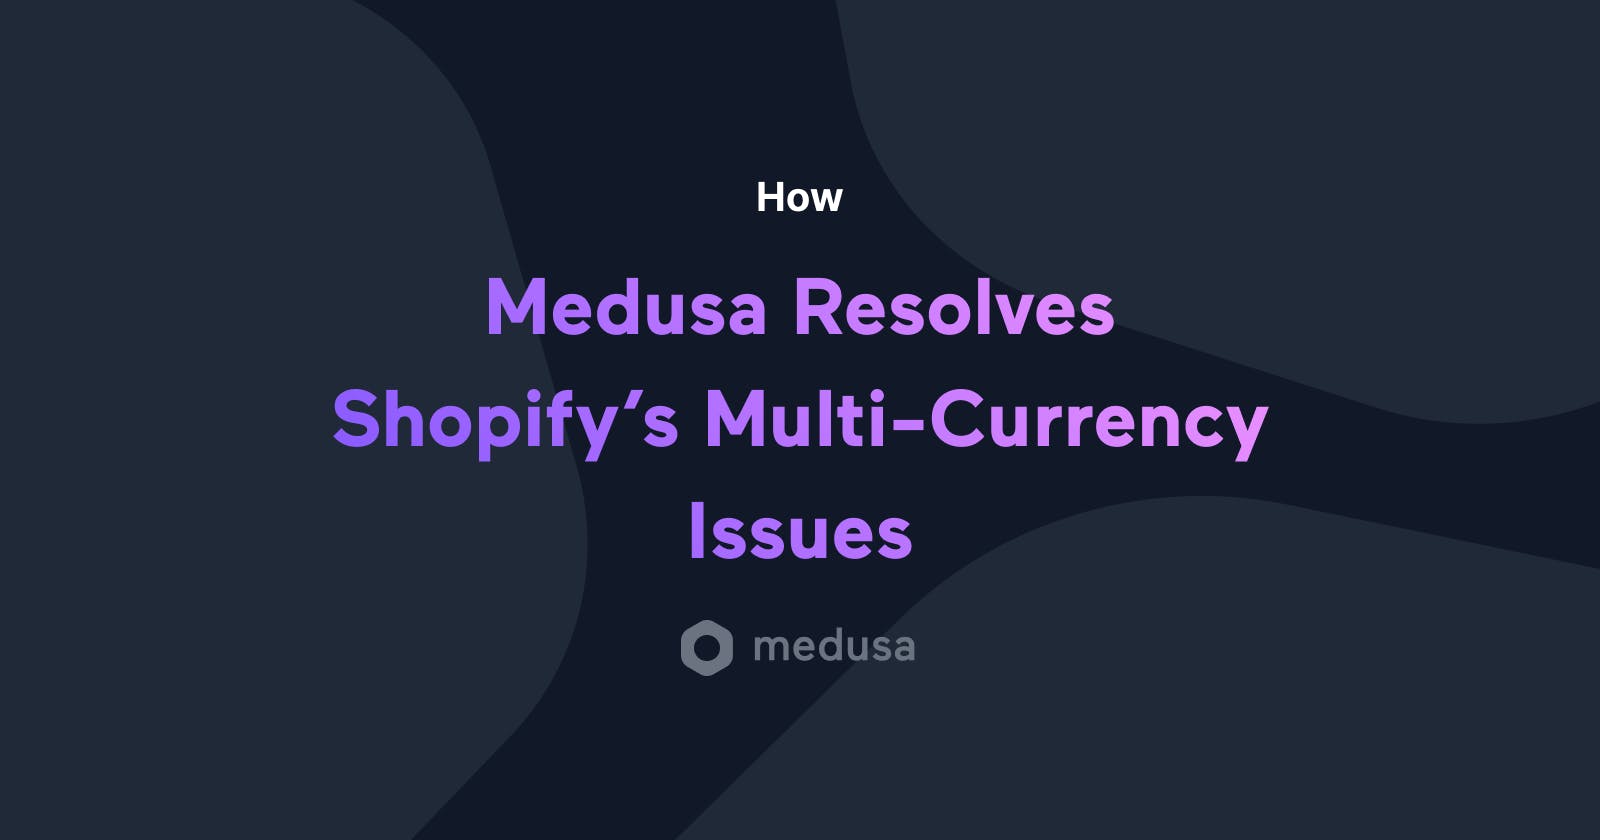 How Our Open Source Platform Resolves Shopify's Multi-Currency Issues